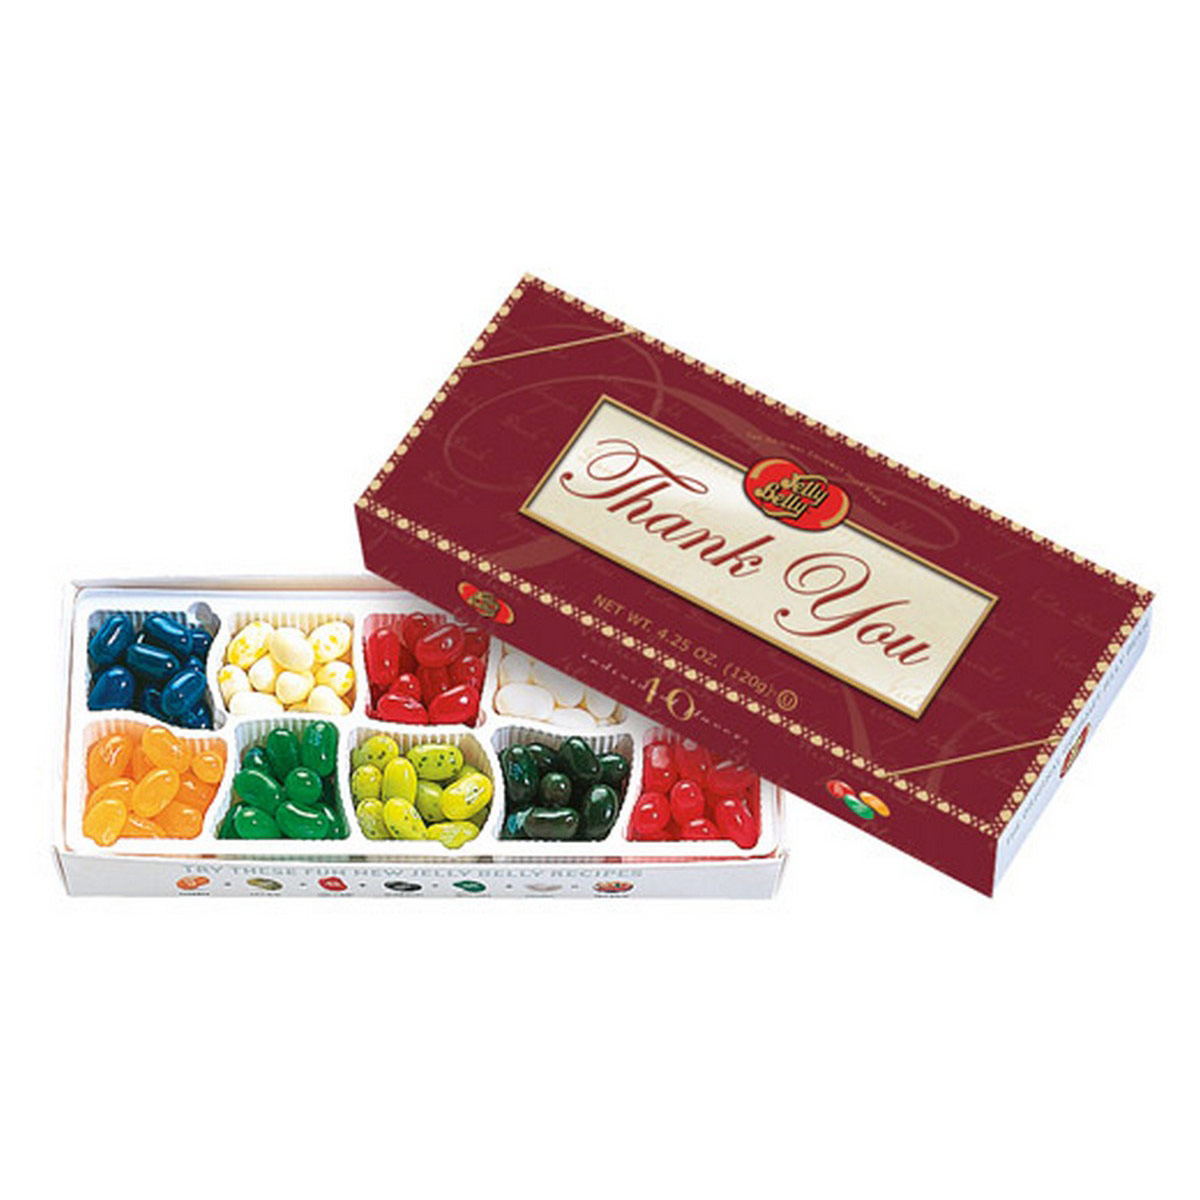 Jelly Belly 10-Flavor Thank You Gift Box. Assorted beans like Buttered Popcorn and Very Cherry. Great present for candy fans.